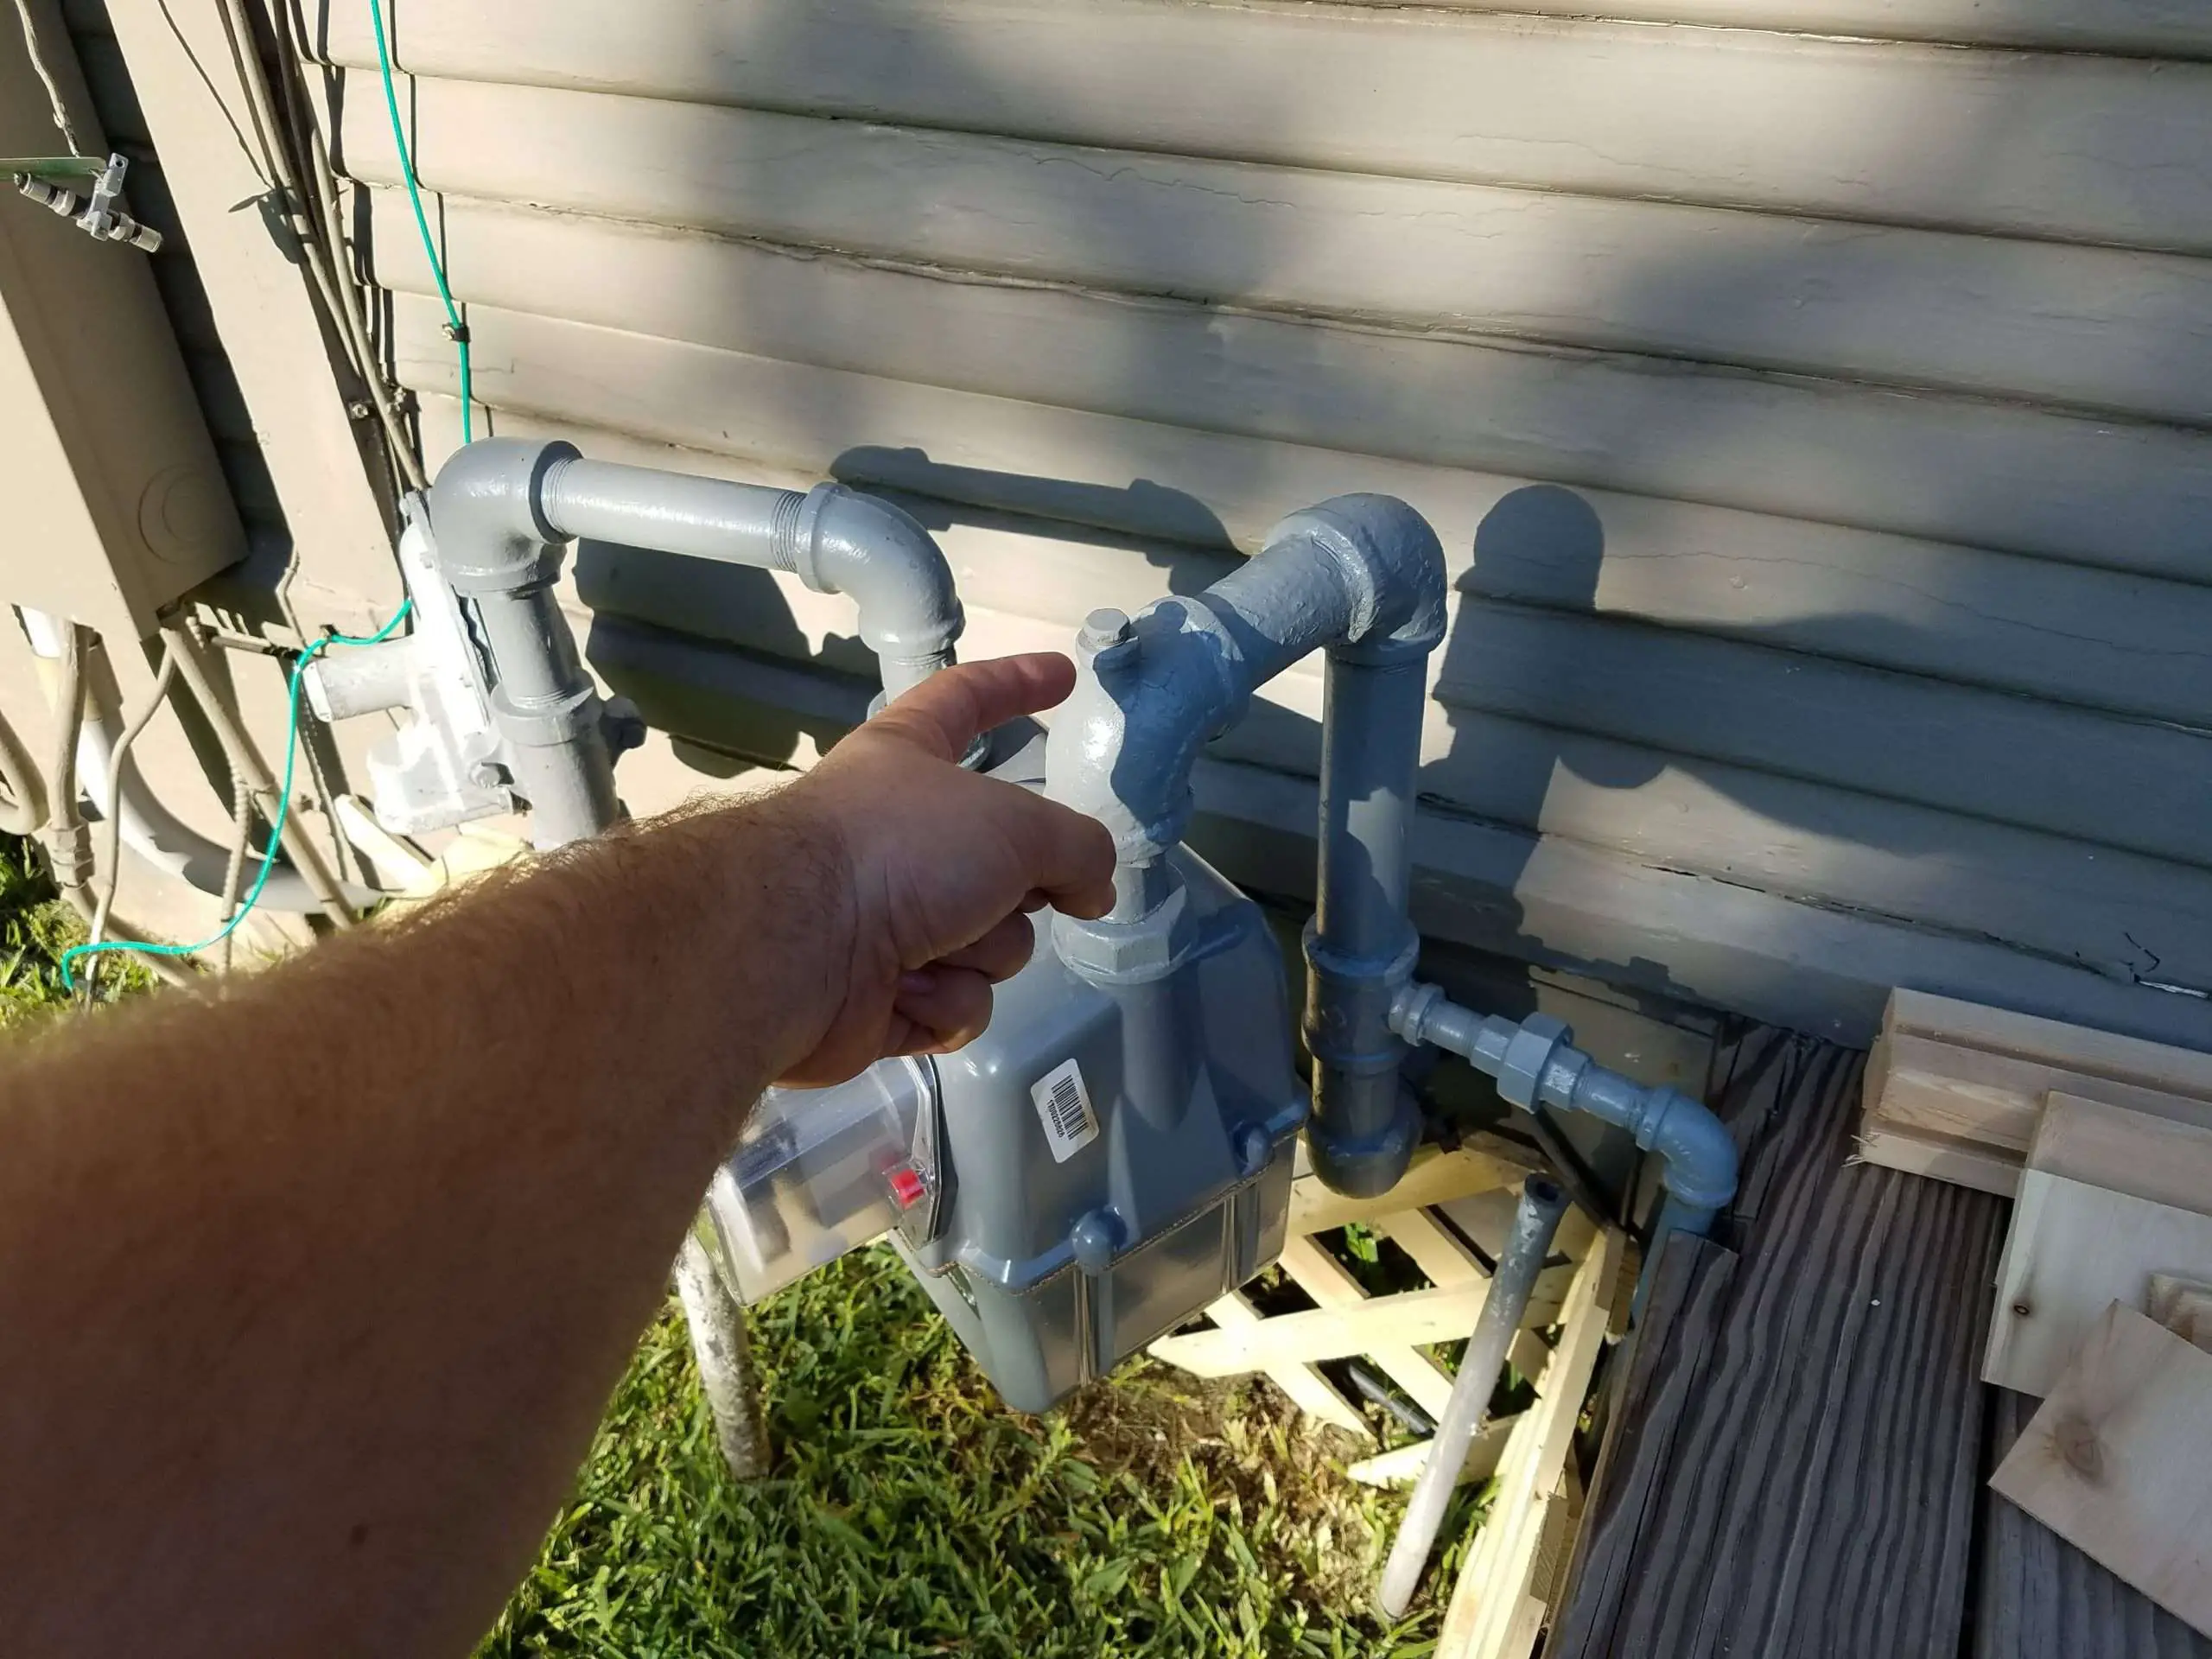 Can I hook up a natural gas grill using this? : Plumbing